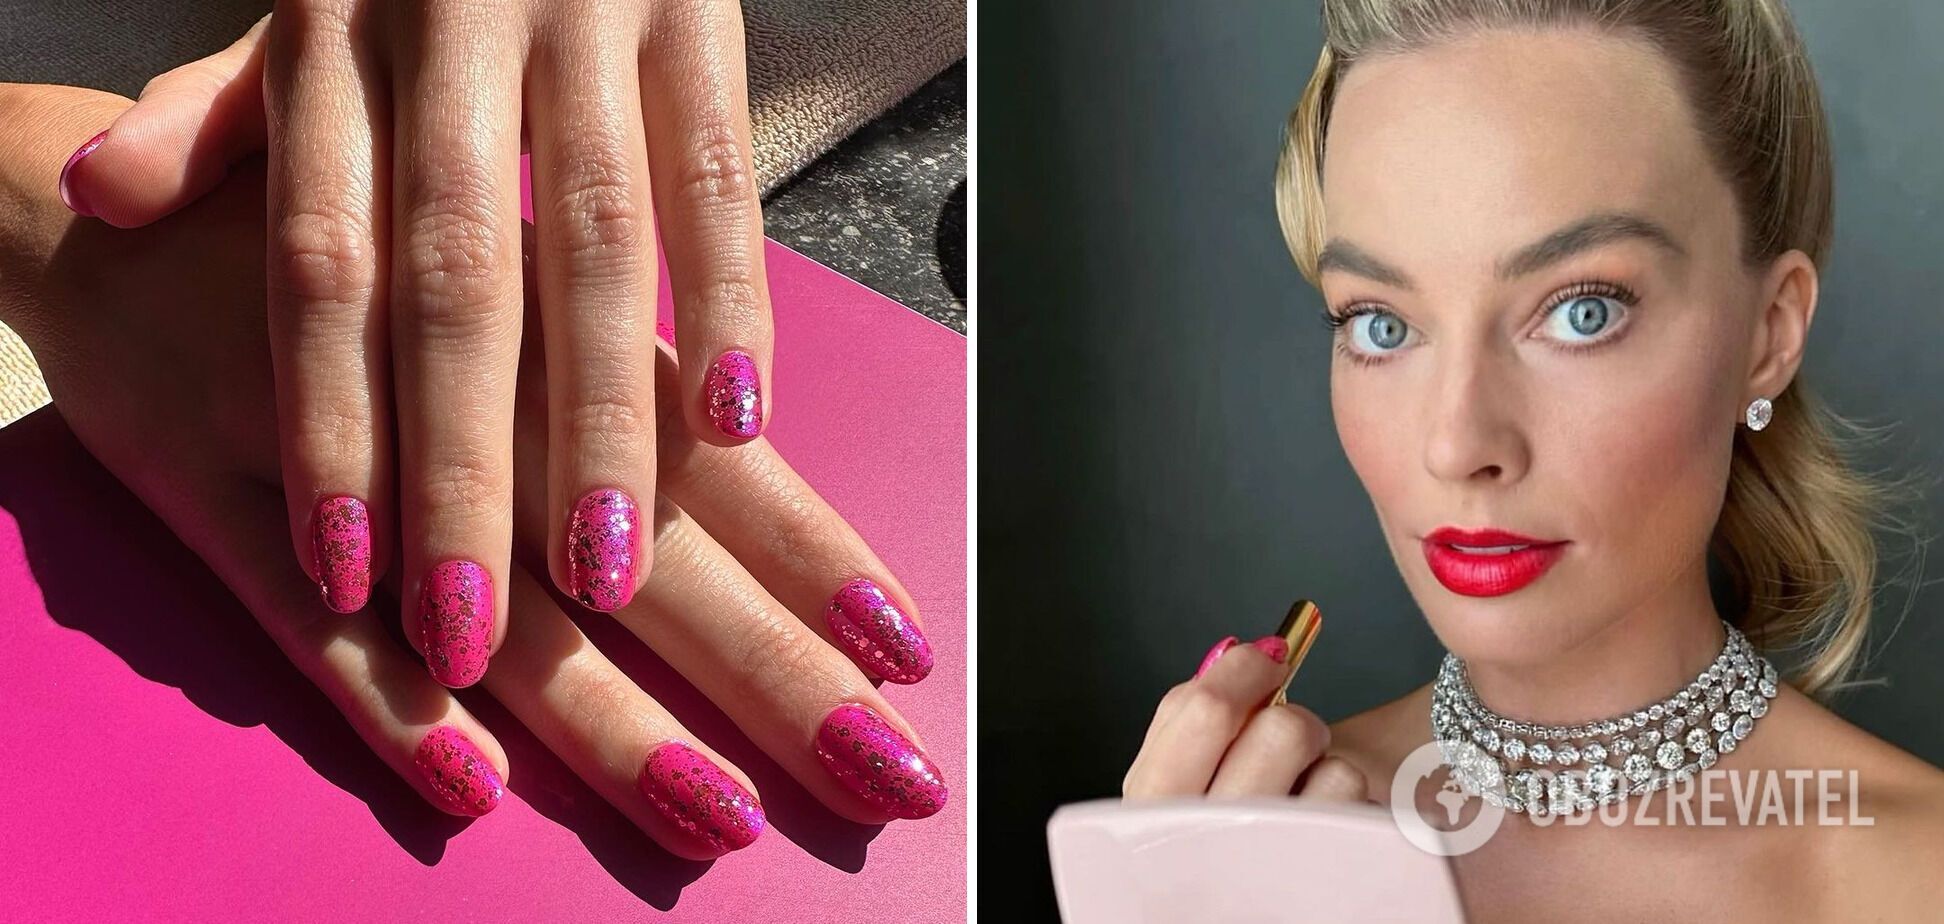 What the perfect fall manicure from Tom Bachik, who is widely appreciated by many Hollywood stars, looks like